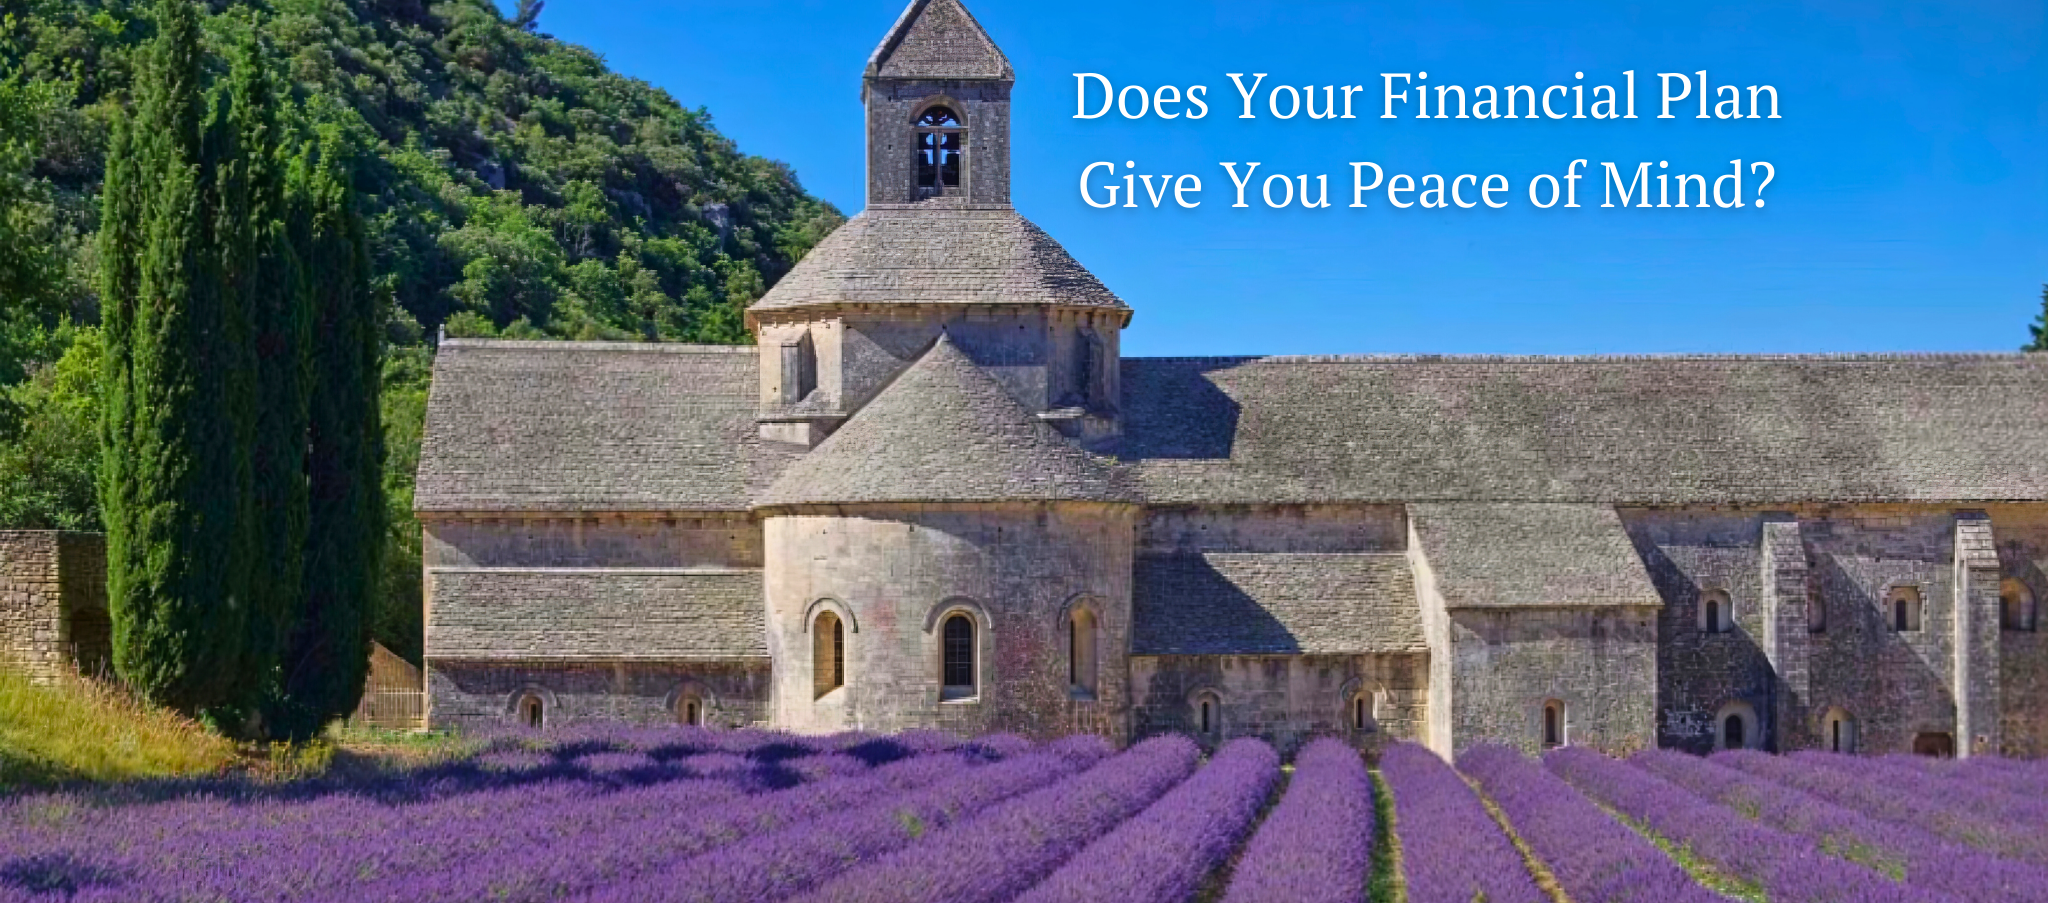 Does Your Financial Plan Give You Peace of Mind (3)